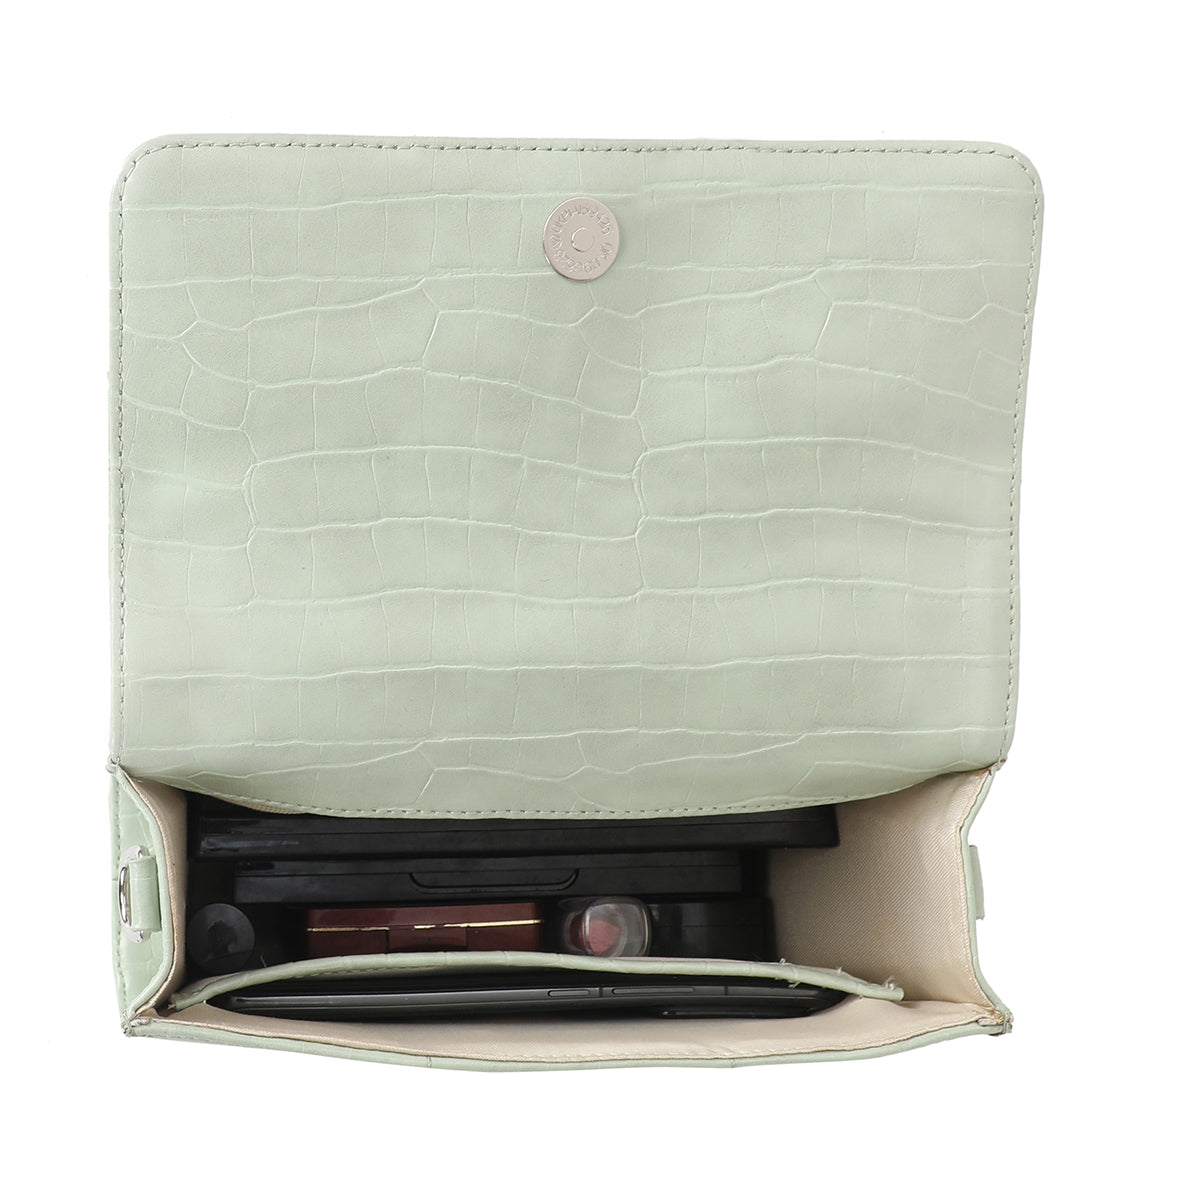 United Colors of Benetton Candace Woman's PU Sling Pista